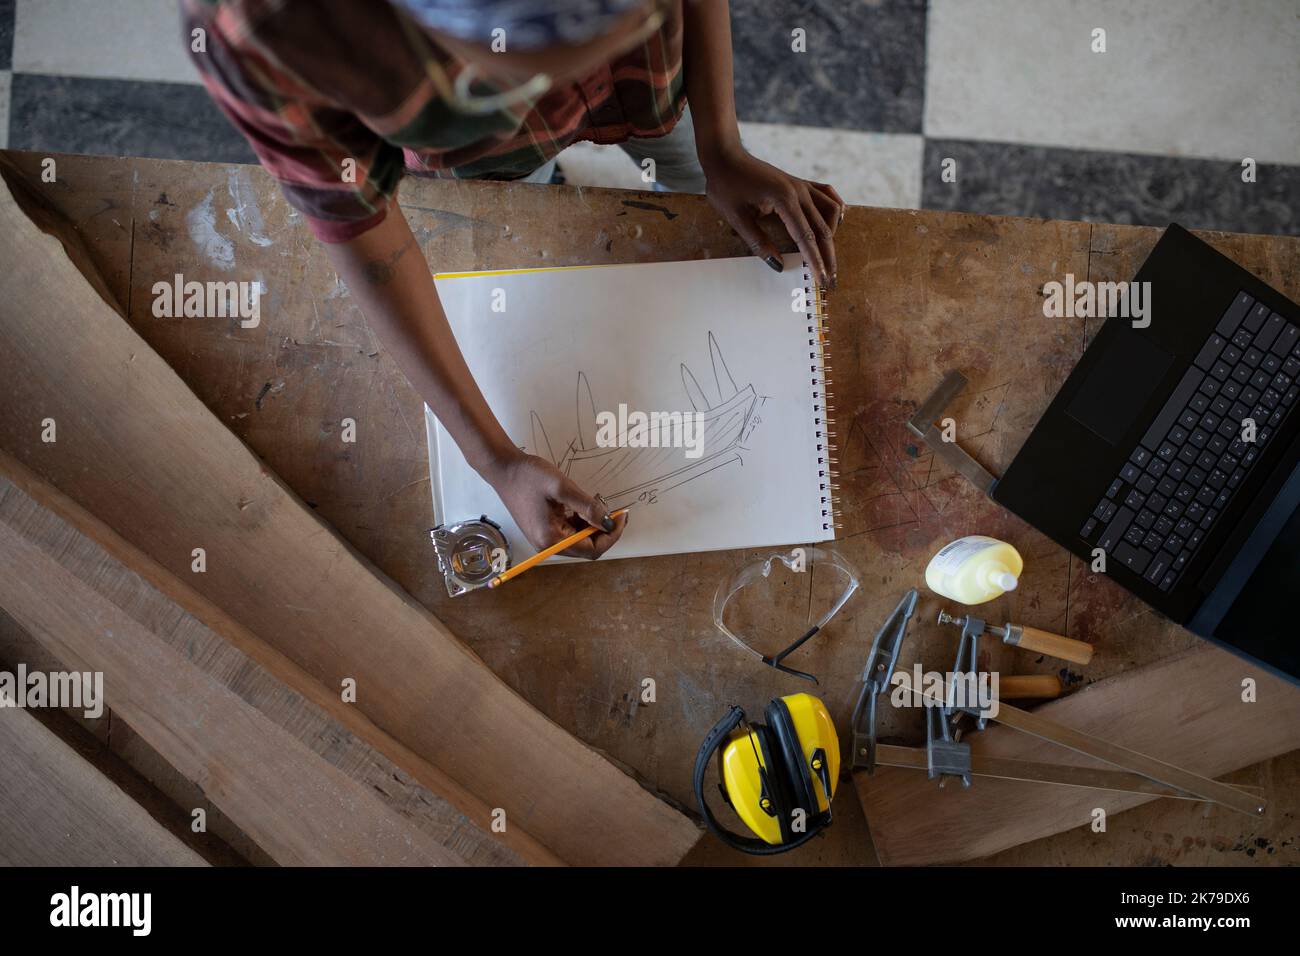 Overhead view of woman designing furniture on work bench Stock Photo